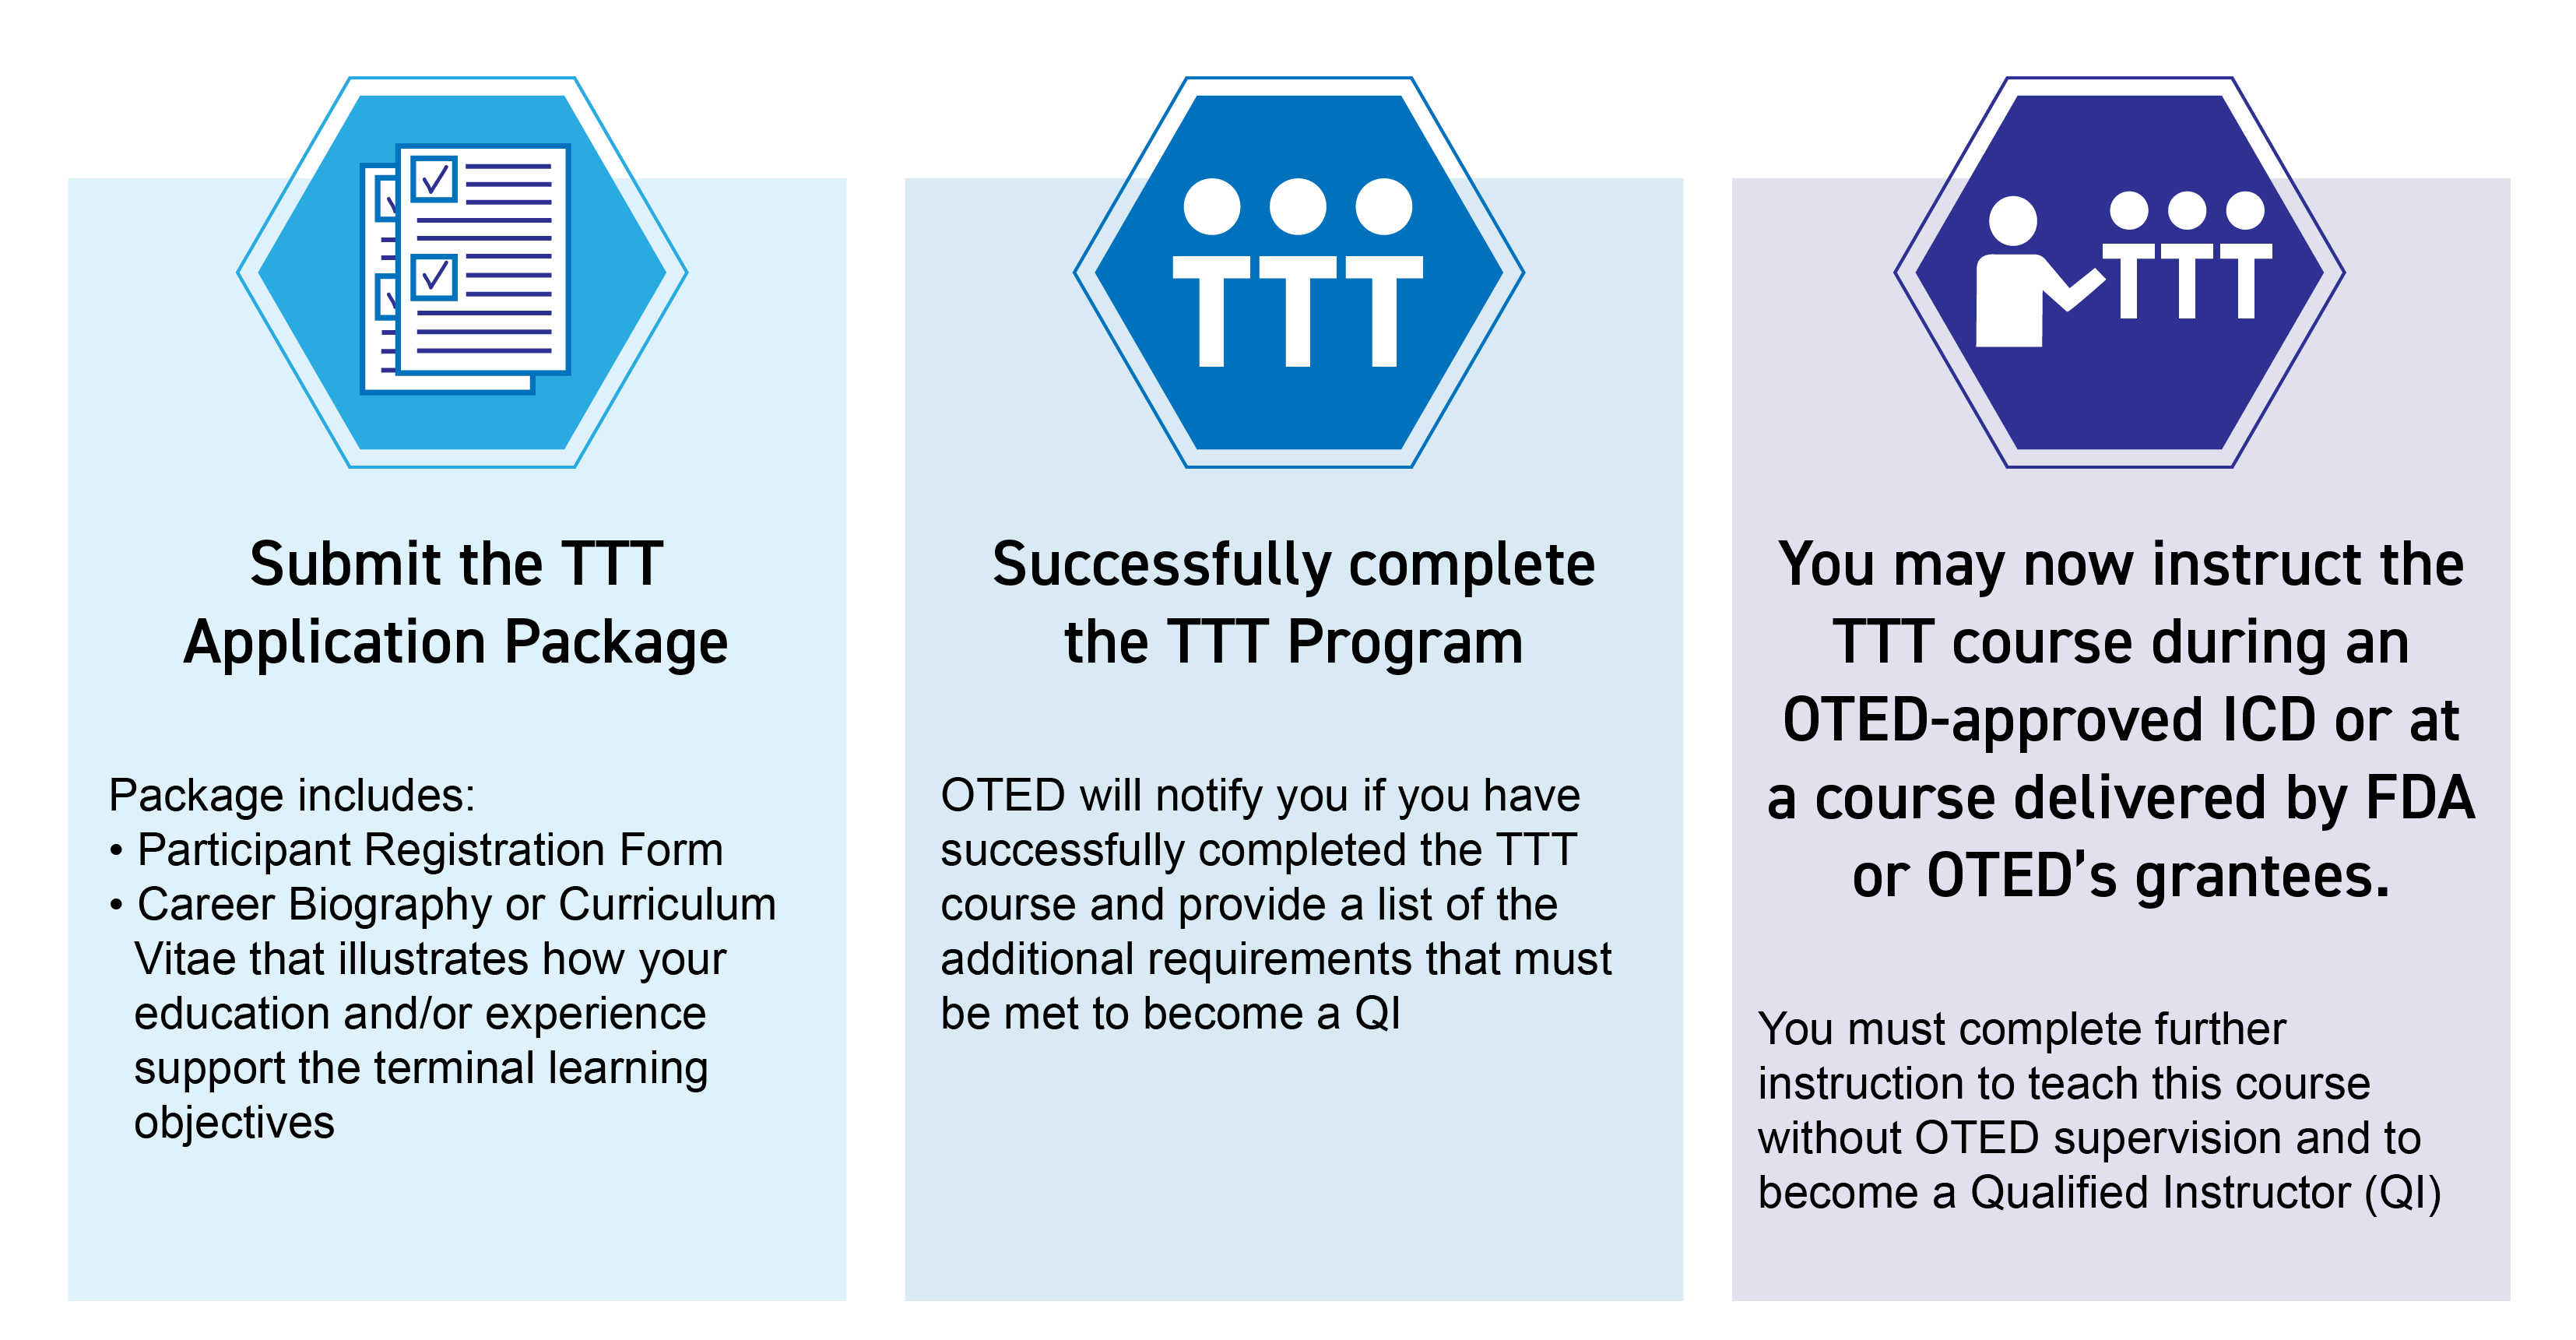 Infographic showing steps to become a TTT trainer: Submit application, successfully complete TTT program, instruct a TTT course.